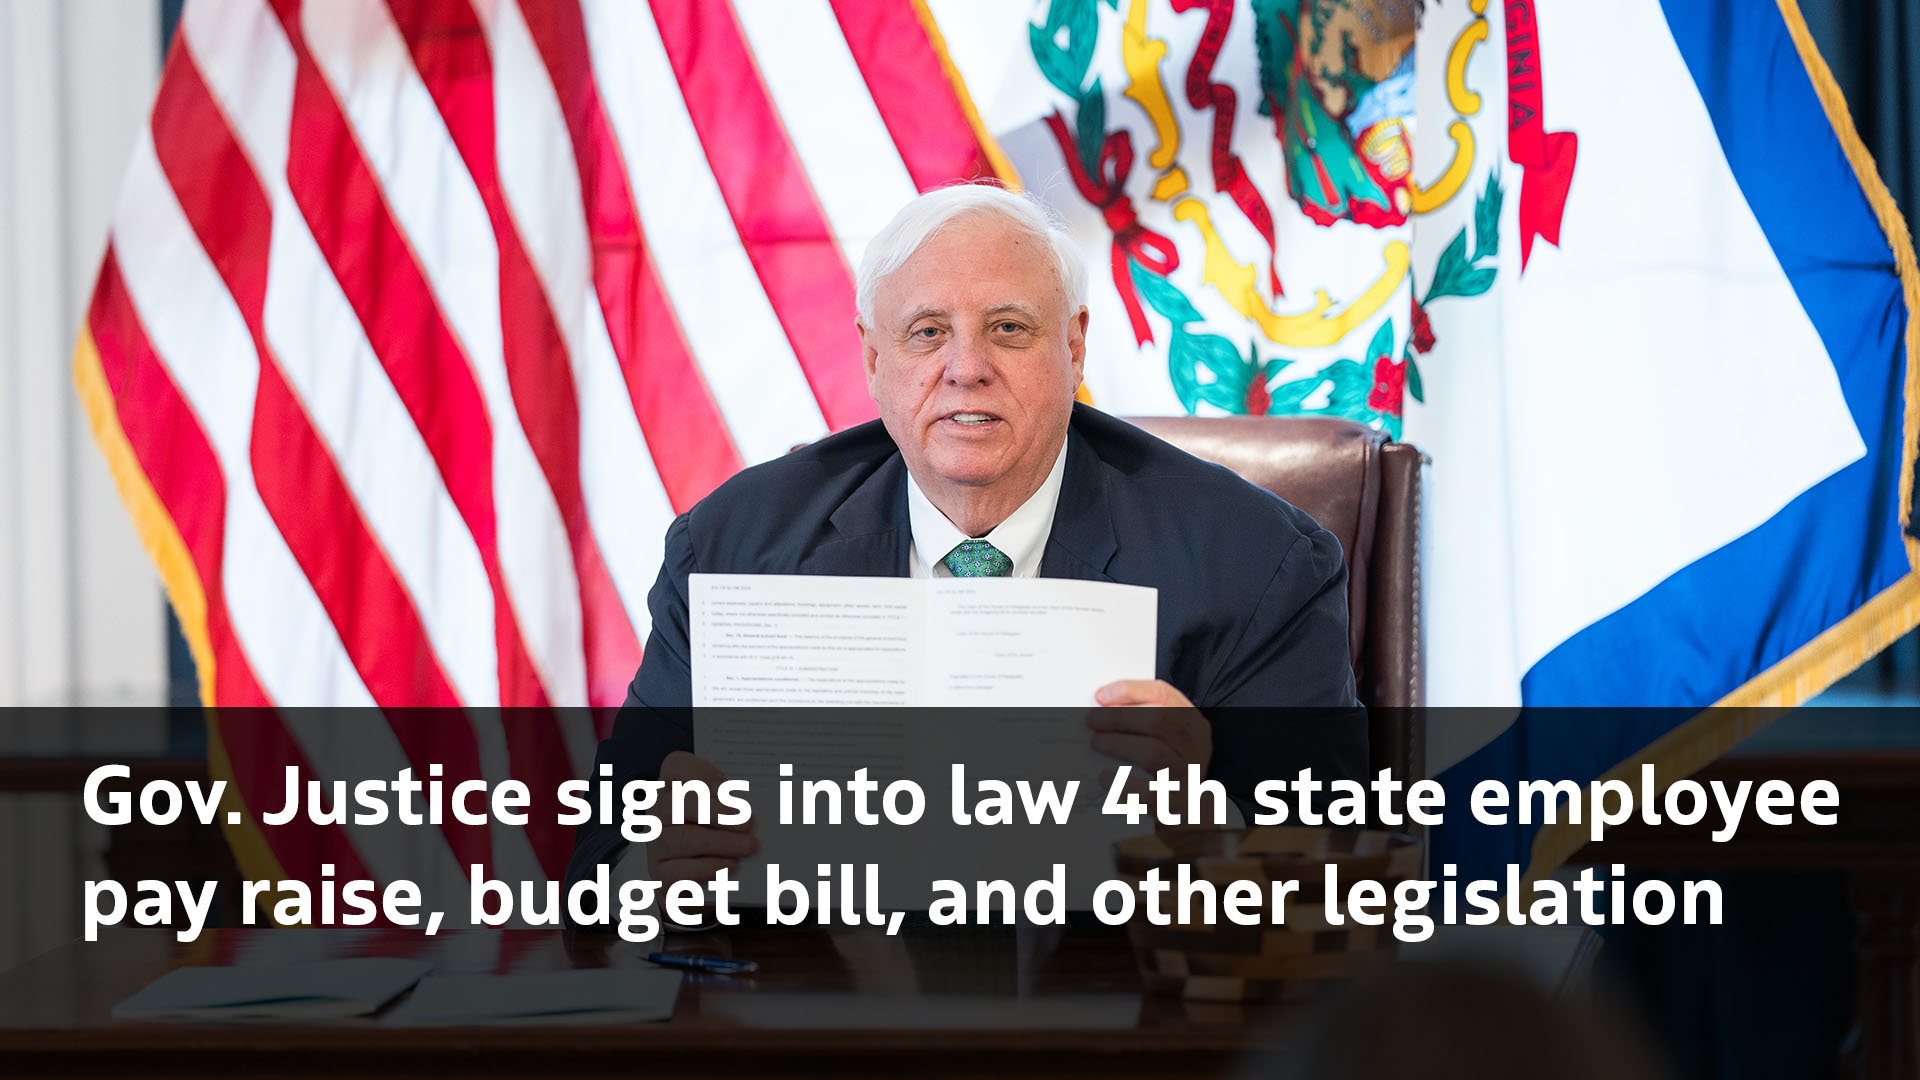 Gov. Justice signs into law 4th state employee pay raise, budget bill